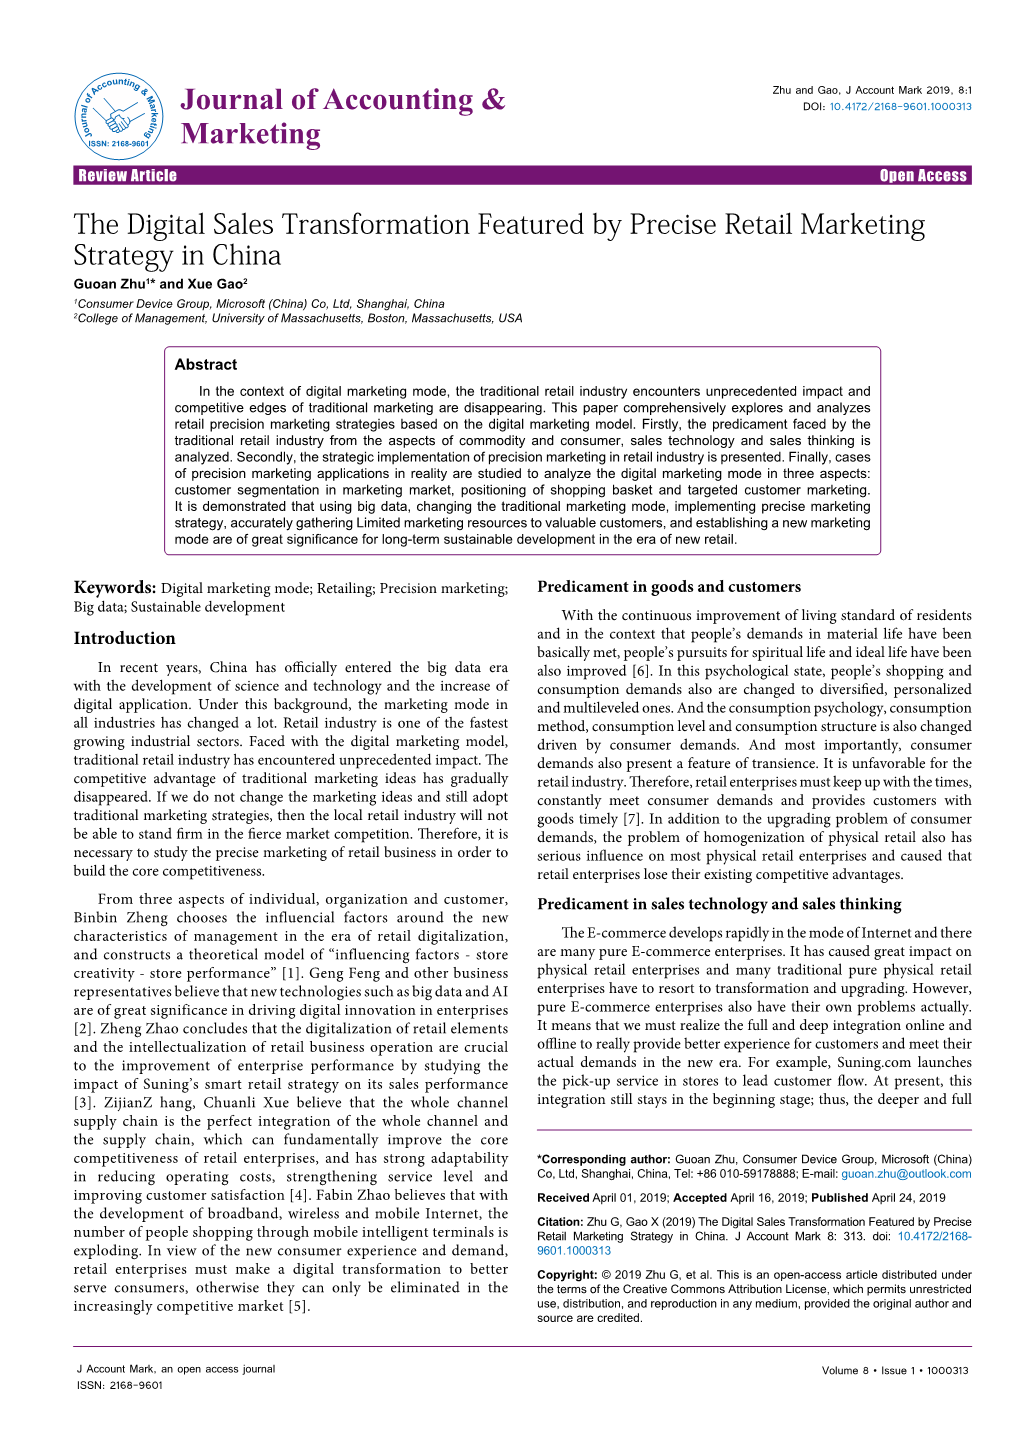 The Digital Sales Transformation Featured by Precise Retail Marketing Strategy in China